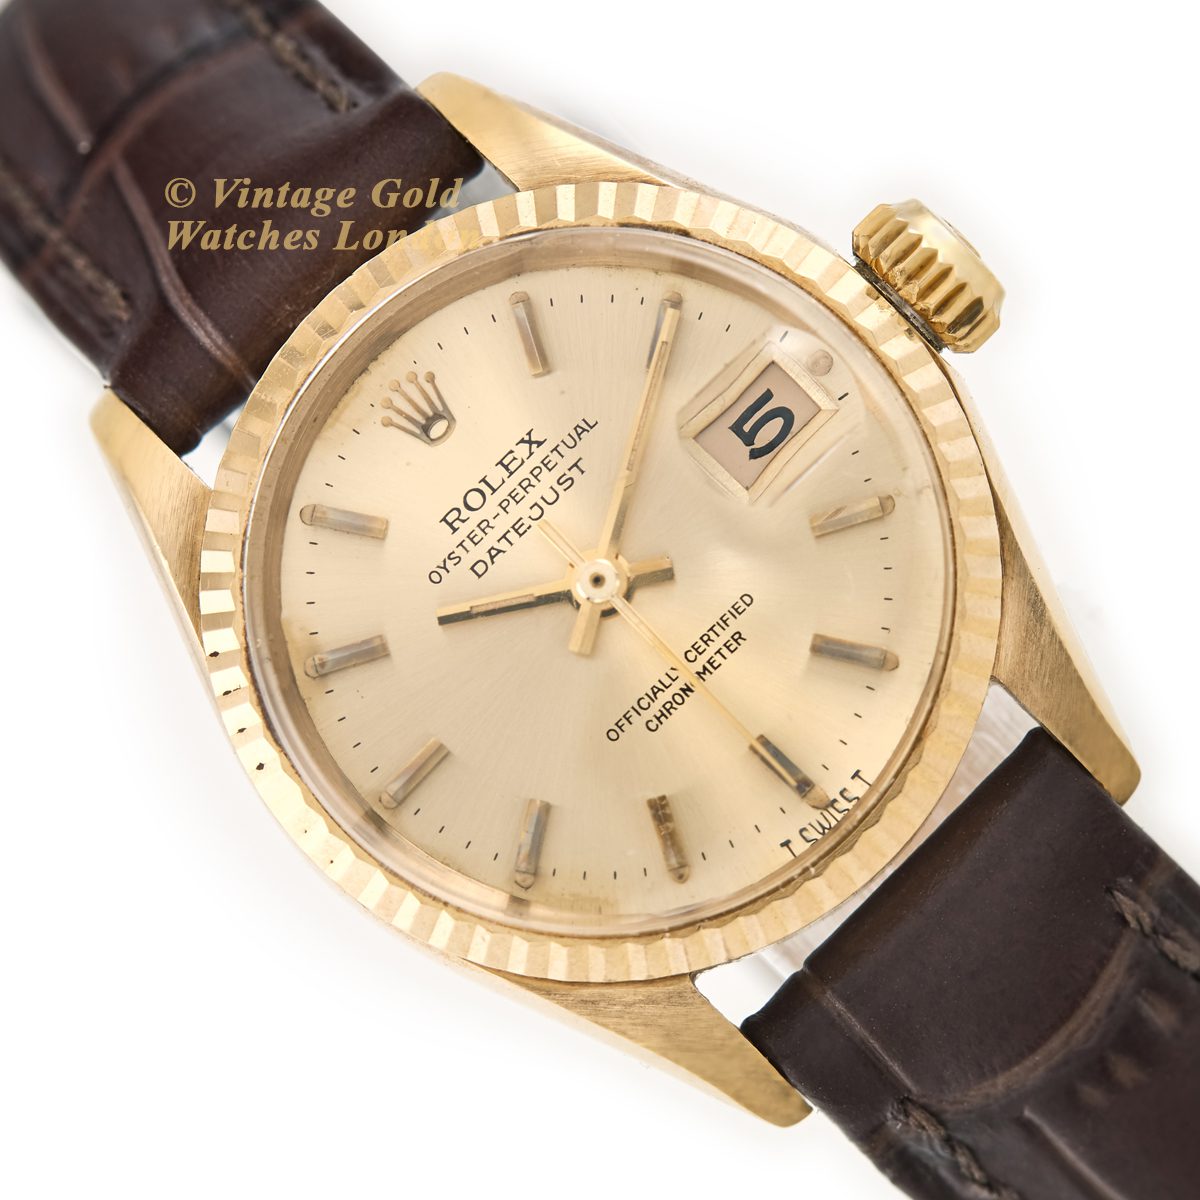 Ladies Rolex Oyster Perpetual Datejust Model Ref.6517 18ct 1966 with Papers | Gold Watches